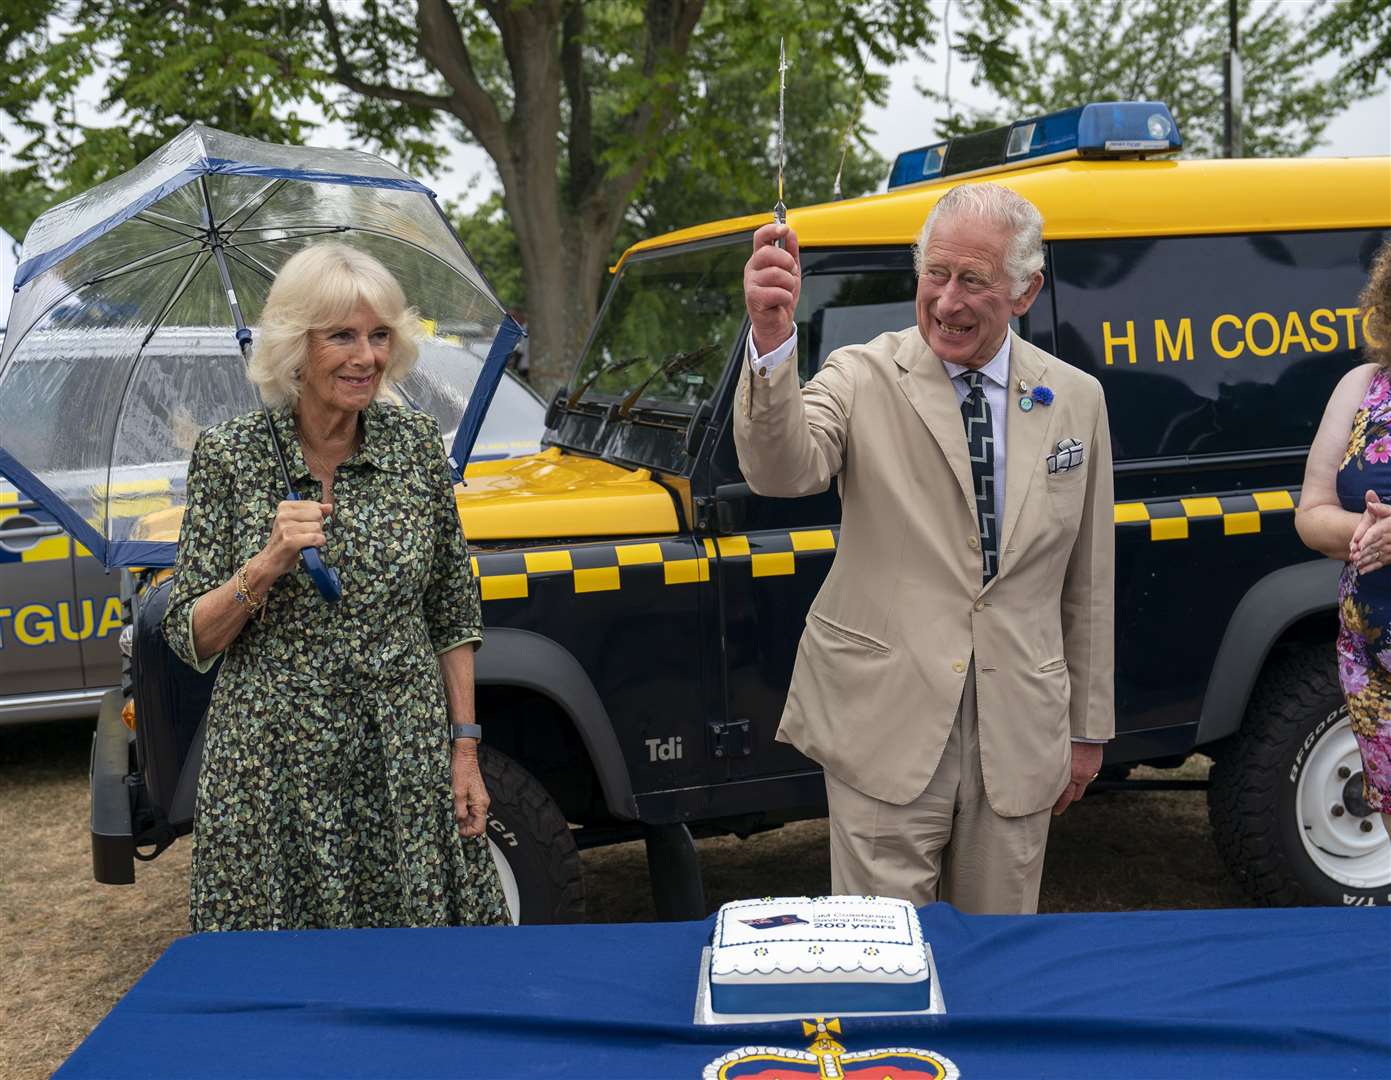 The Prince of Wales and Duchess of Cornwall helped marked the 200-year anniversary of the Coastguard (Arthur Edwards/The Sun/PA)